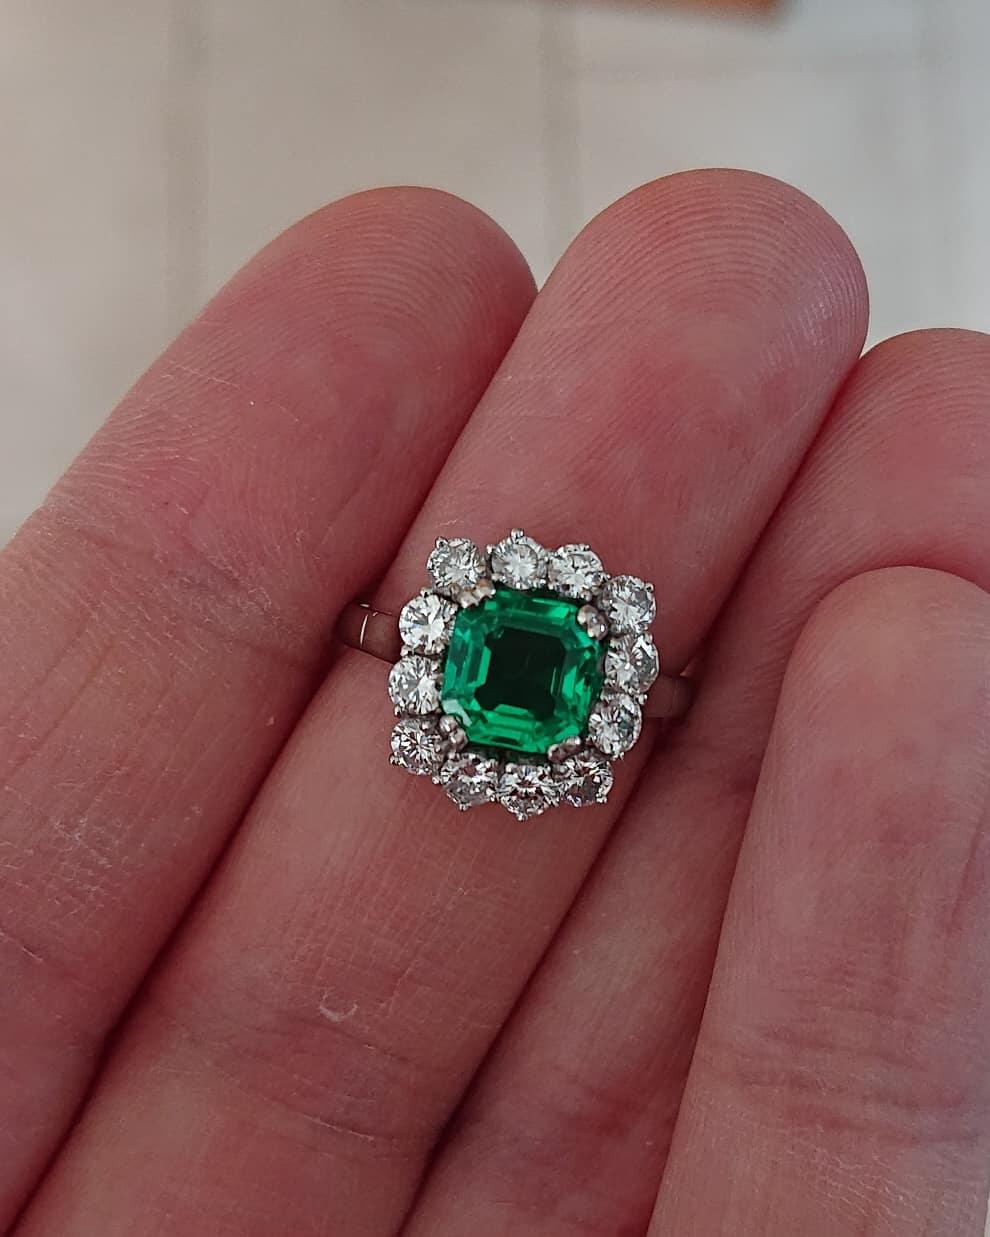 1.51 Carat Colombian Emerald Diamond and Platinum Cluster Ring with Certificate (Smaragdschliff)